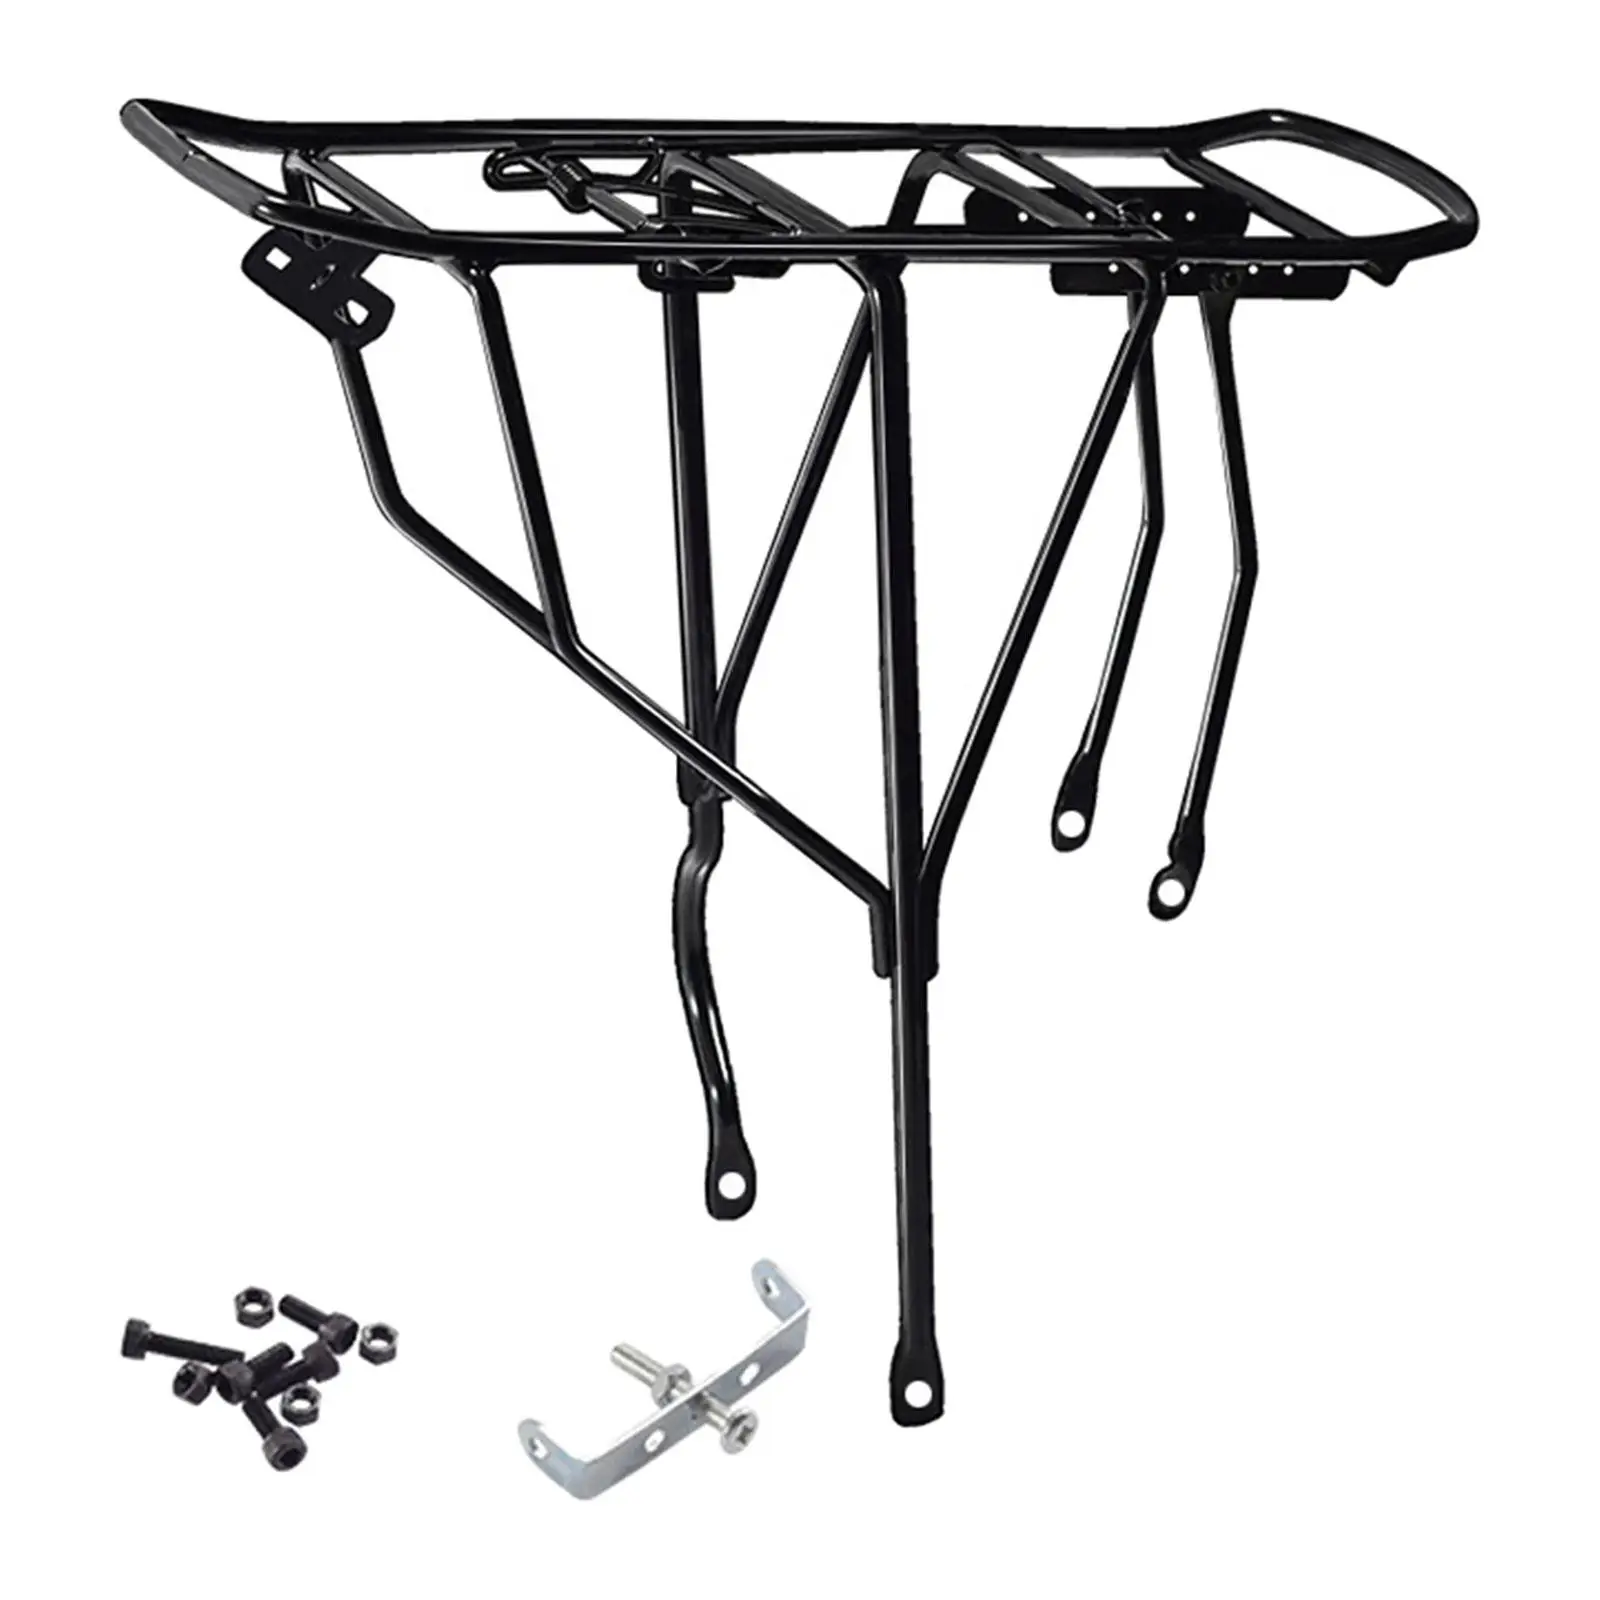 Bicycle Rear Cargo Rack Bicycle Rear Luggage Cargo Rack Shelf Riding Replacement Accessories Portable Rear Bike Rack